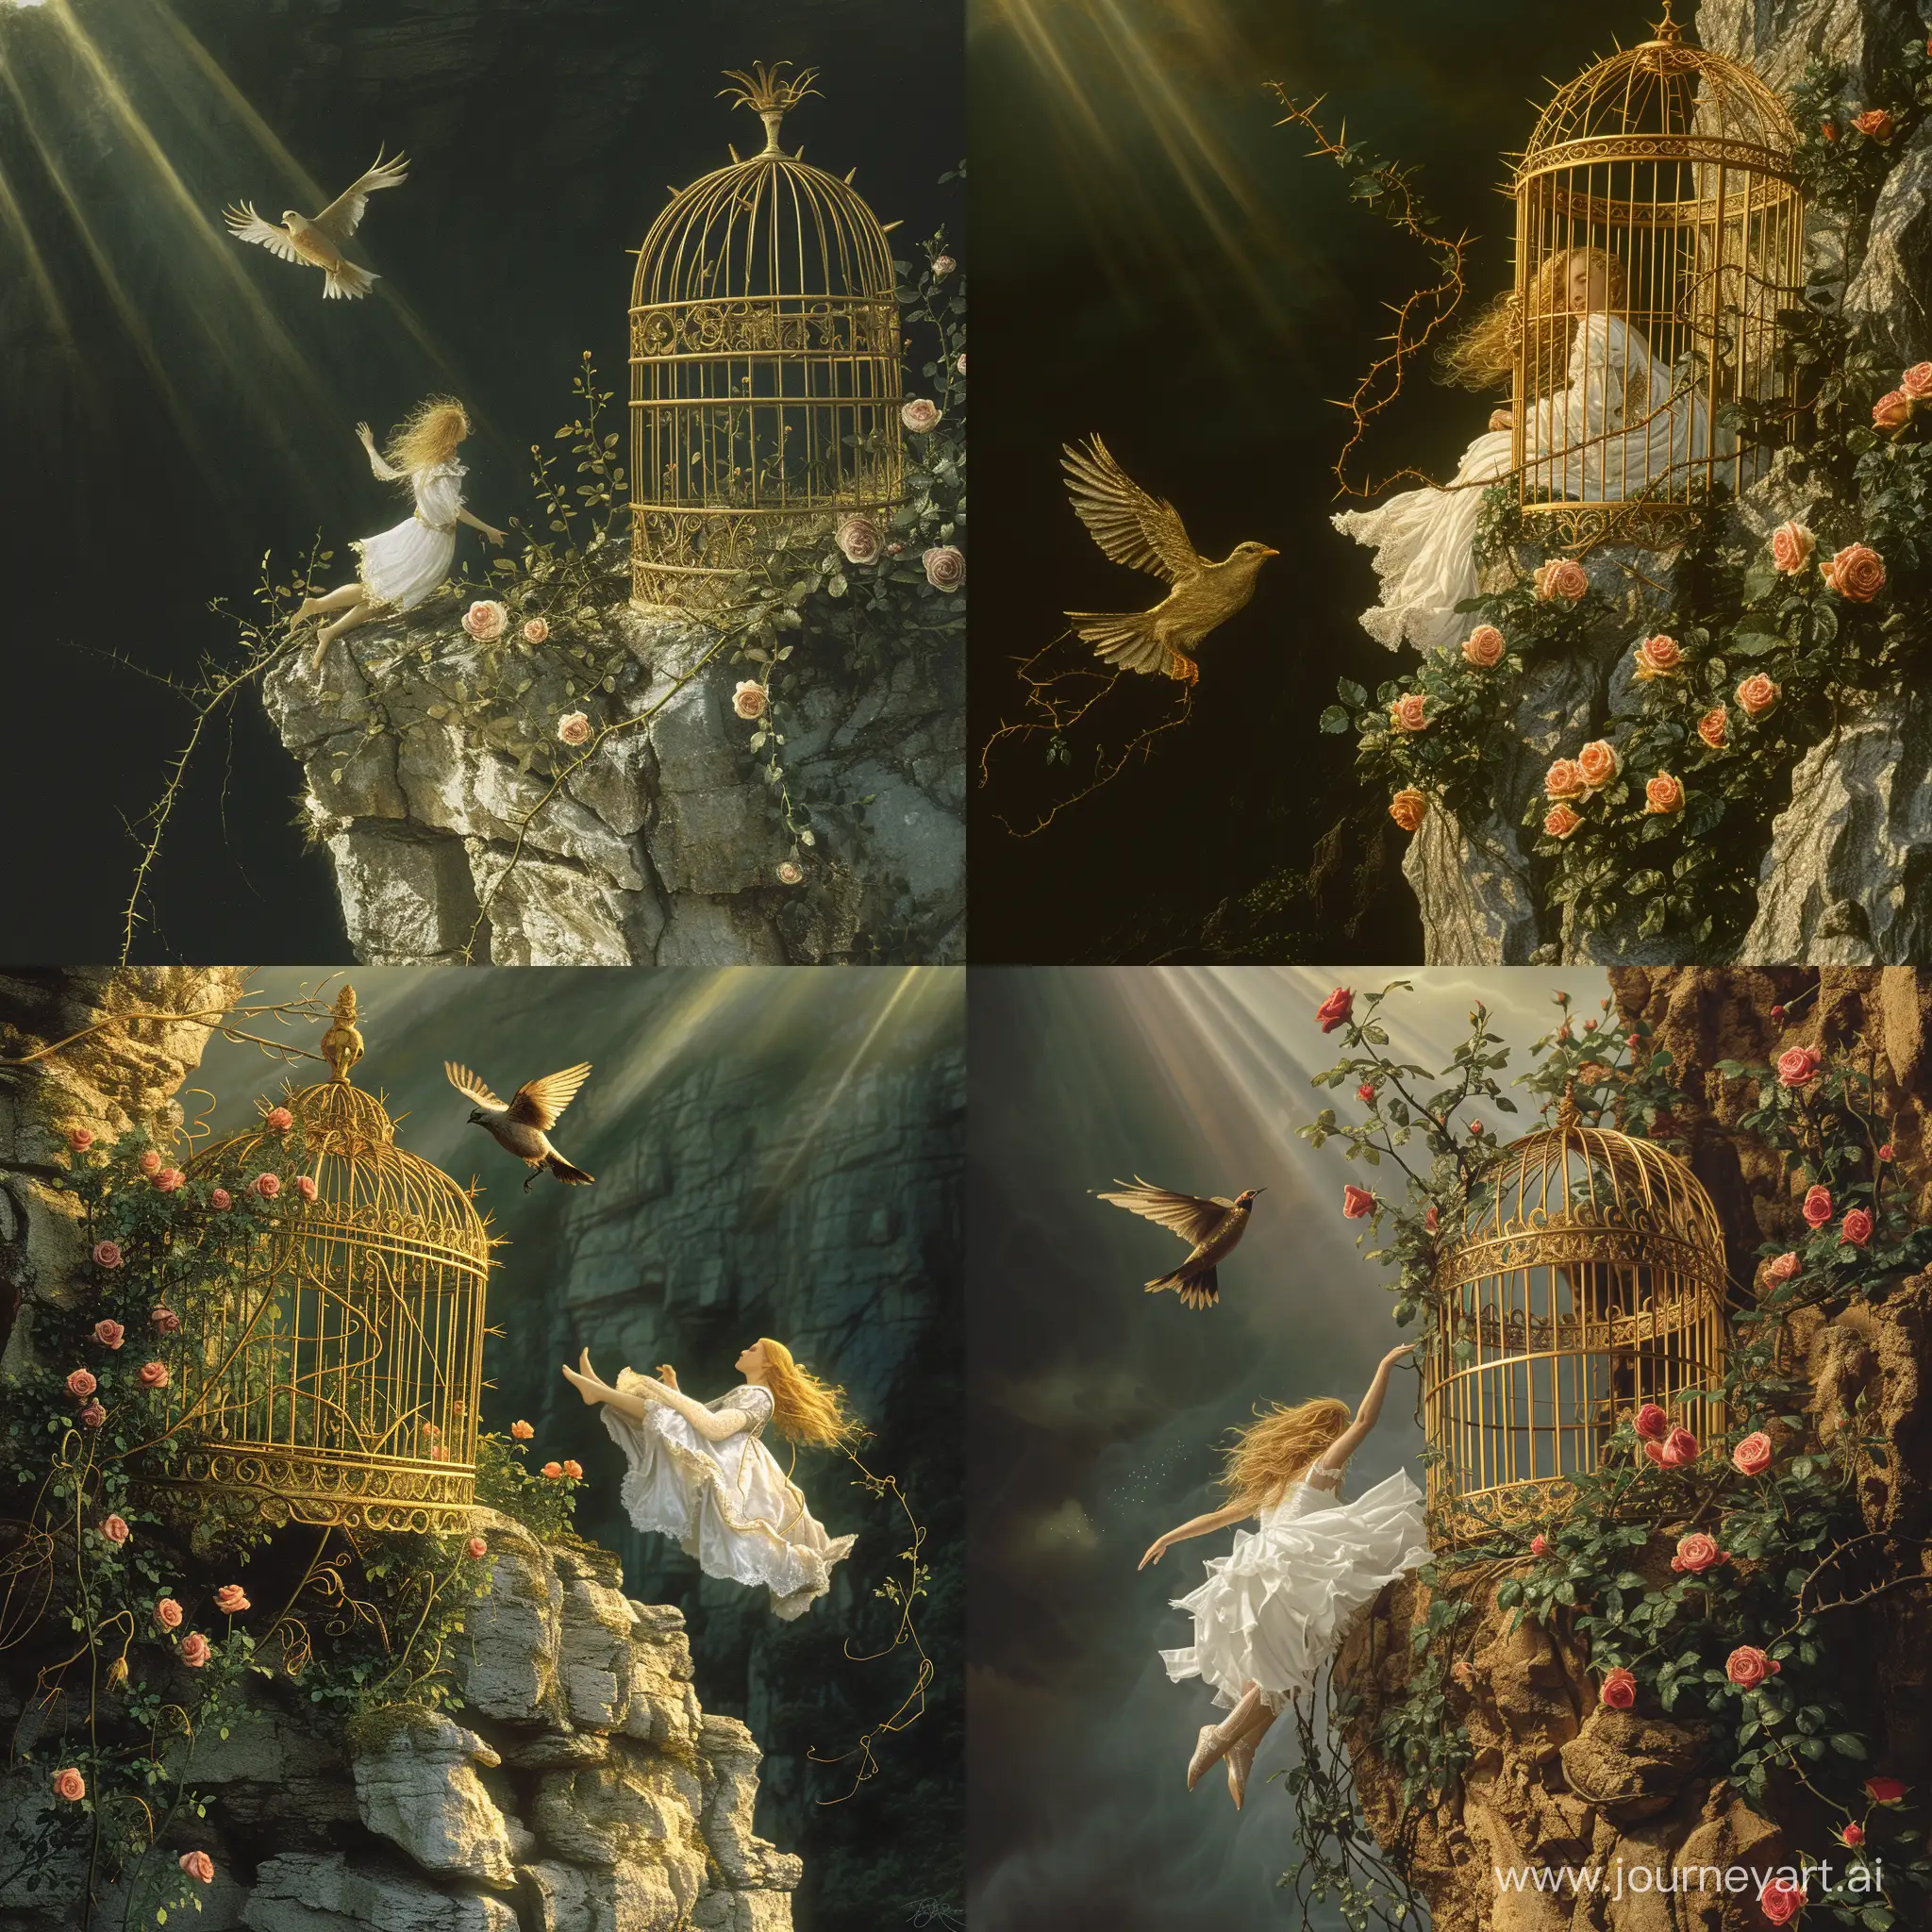 Golden-Cage-and-Dawn-Plunge-Enchanting-Scene-of-a-Falling-Girl-and-a-Graceful-Bird